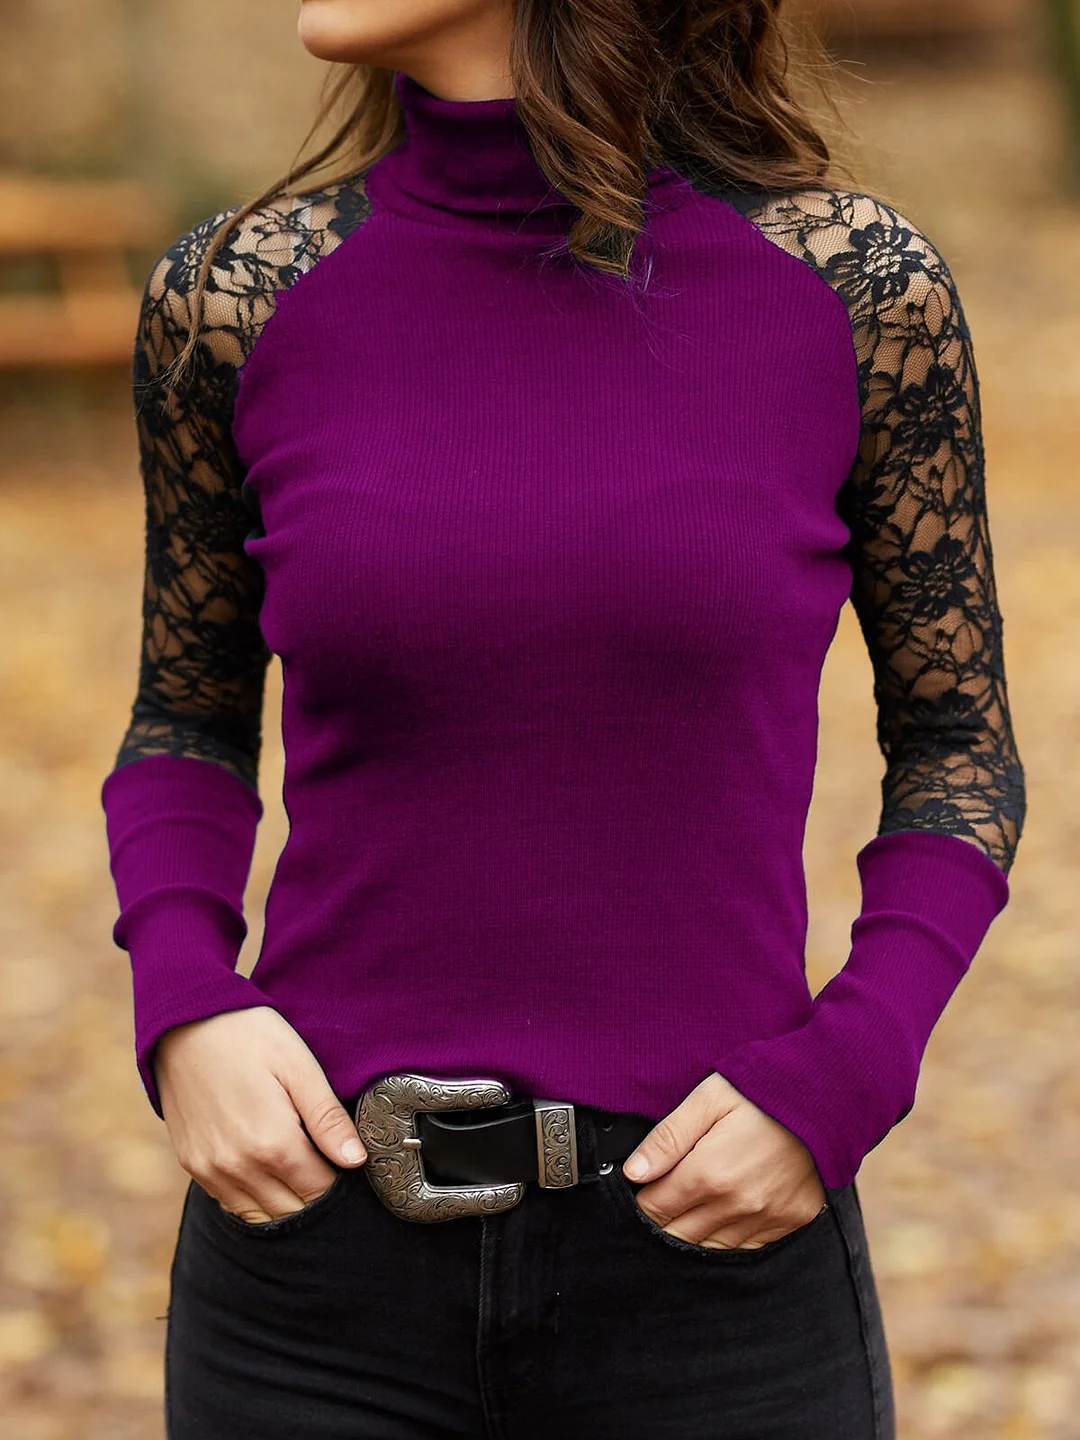 Women's Long Sleeve Turtle Neck Lace Stitching Top